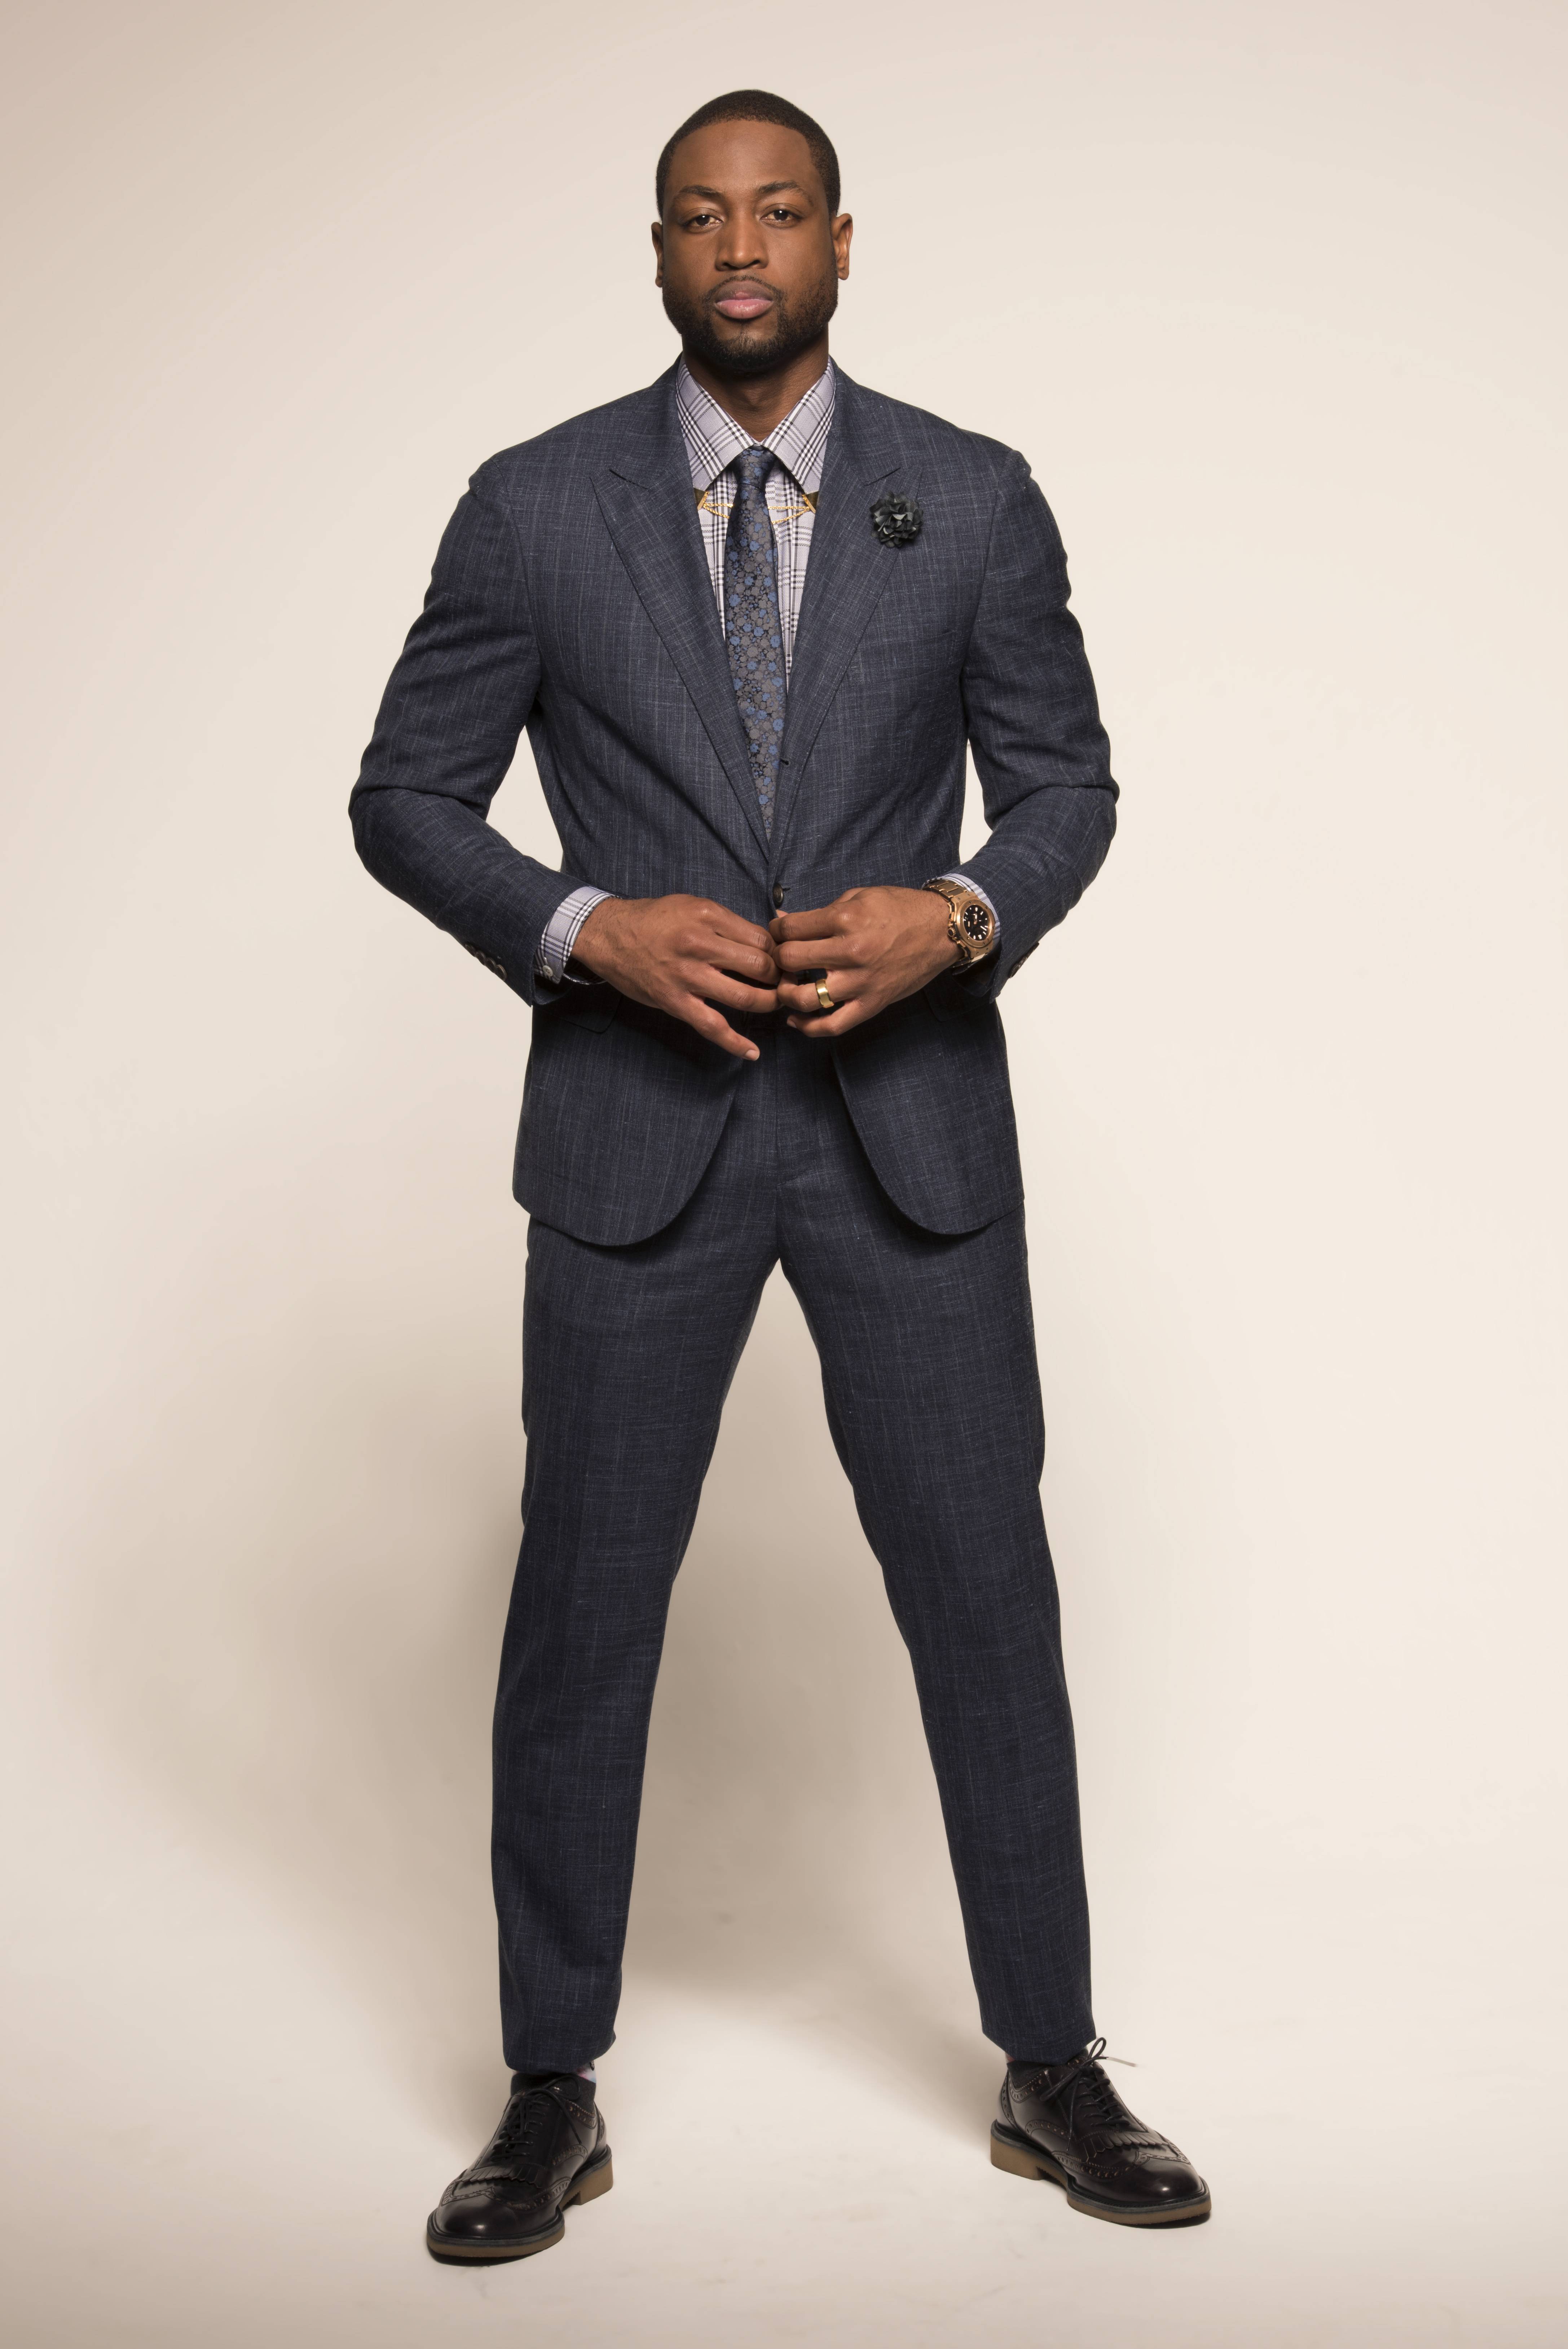 Haute 100: Dwyane Wade Teams Up With The RealReal to Sell Clothes for ...